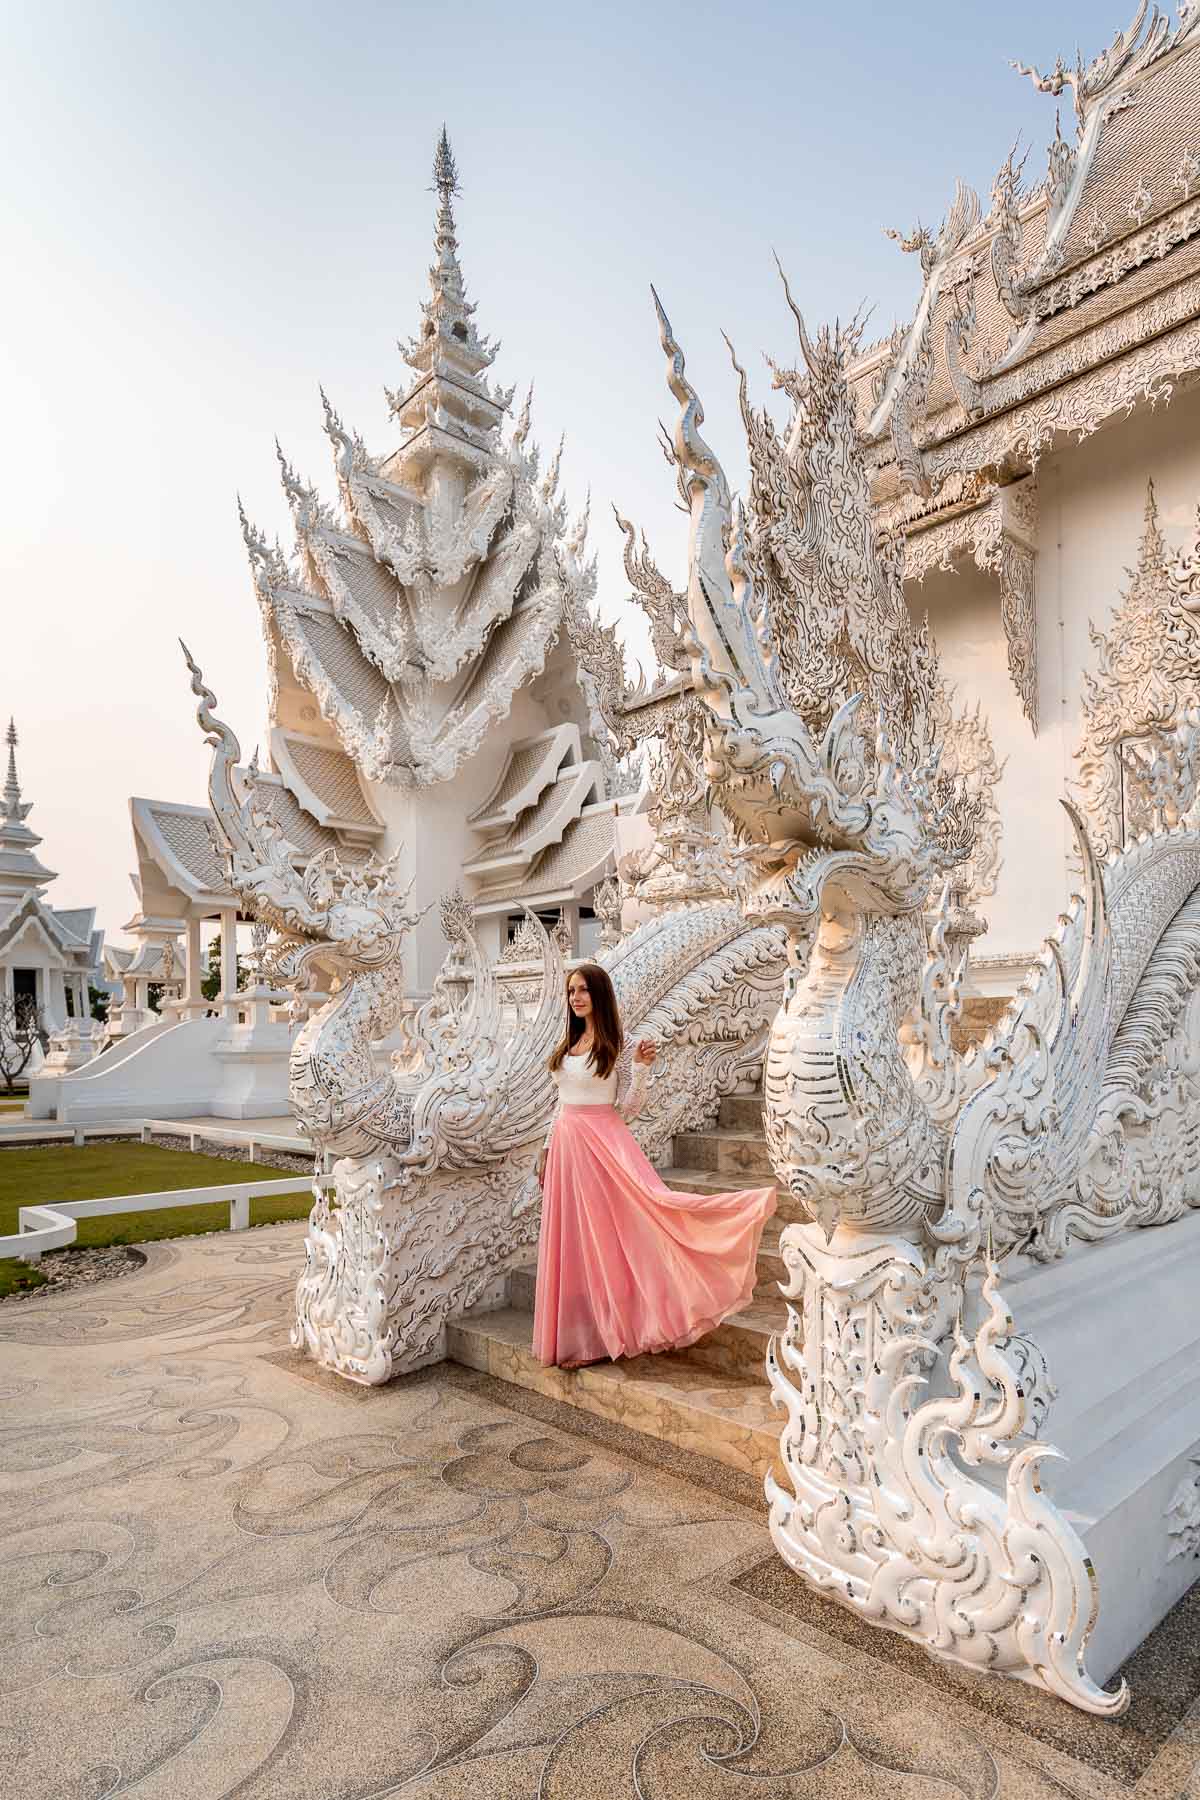 Girl in a pink skirt standing on the stairs in front of Wat Rong Khun, the White Temple in Chiang Rai